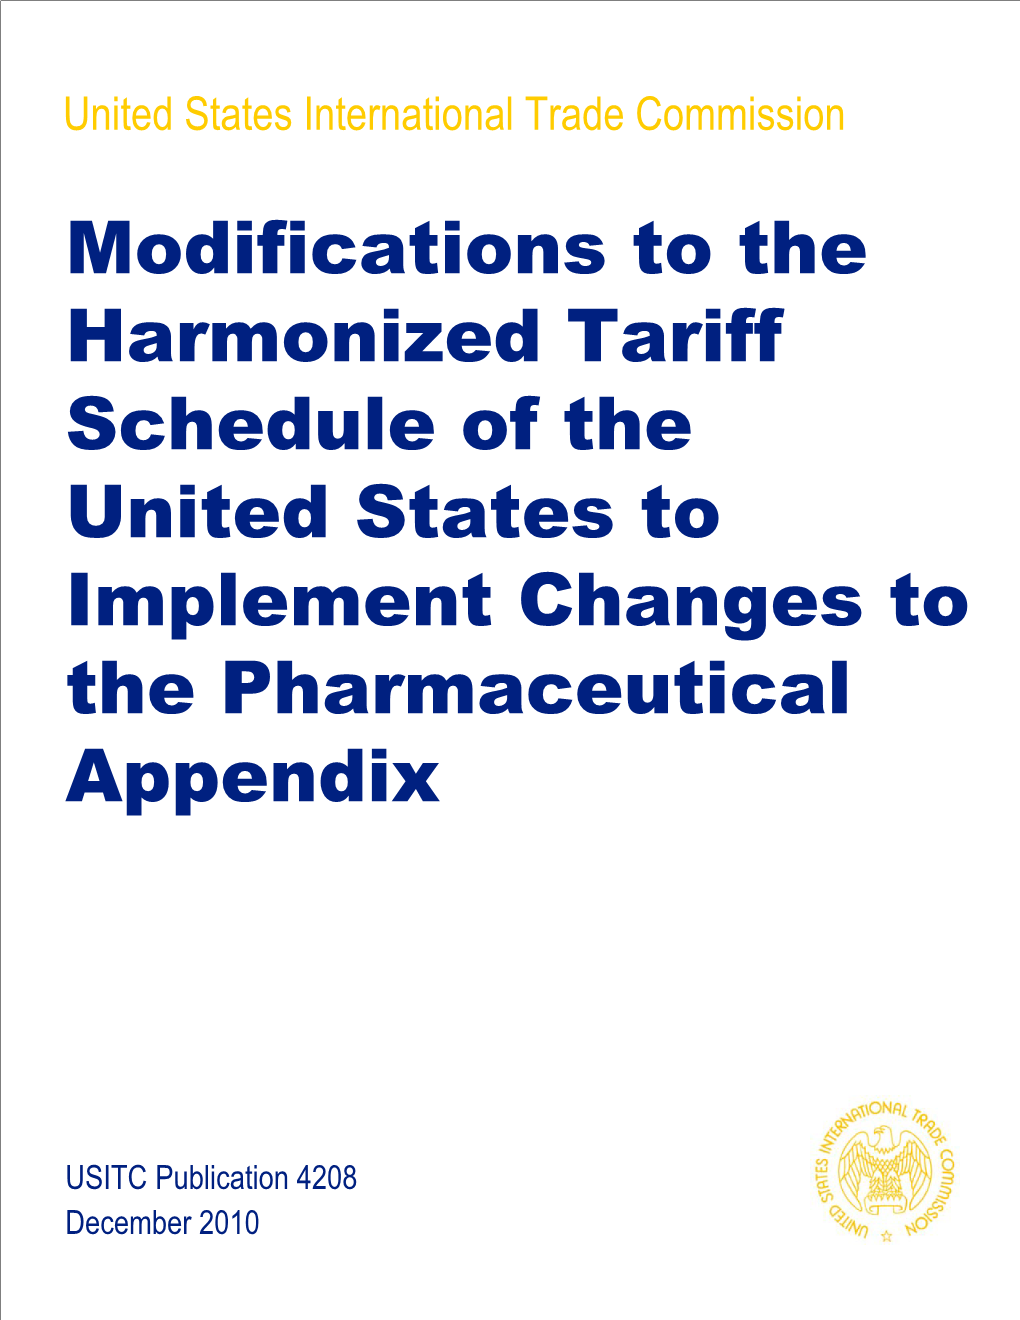 Modifications to the Harmonized Tariff Schedule of the United States to